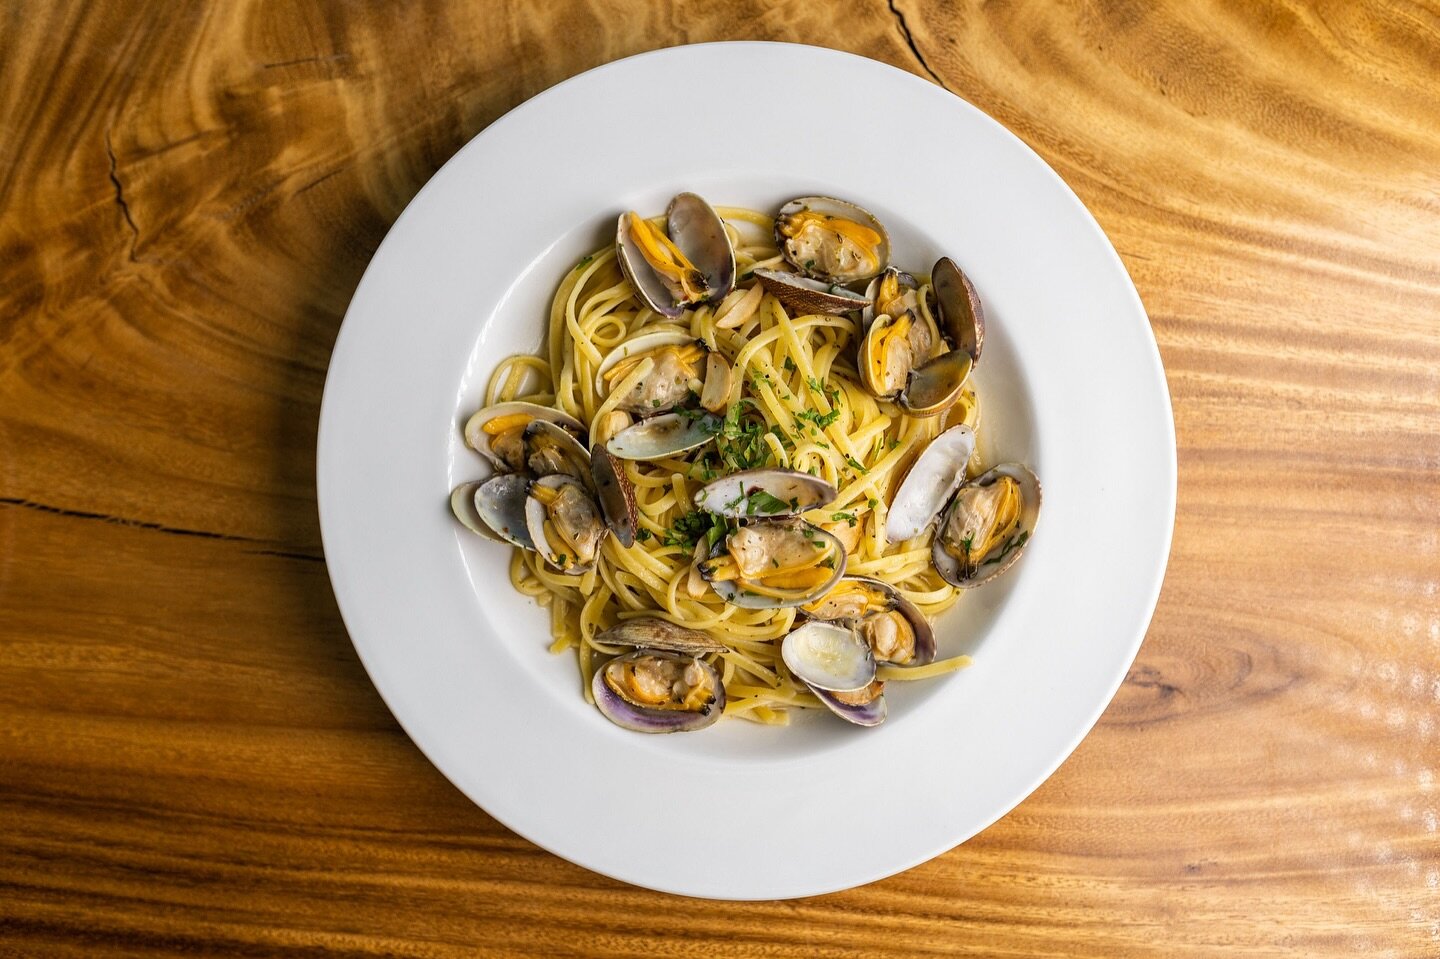 The perfect midday meal.

A classic dish, our Linguine Vongole features al dente linguine balanced by rich yet simple flavors of our fresh herbs, garlic, chili flakes, and succulent and savory clams. 

Join us for lunch served daily from 11am - 3pm.
